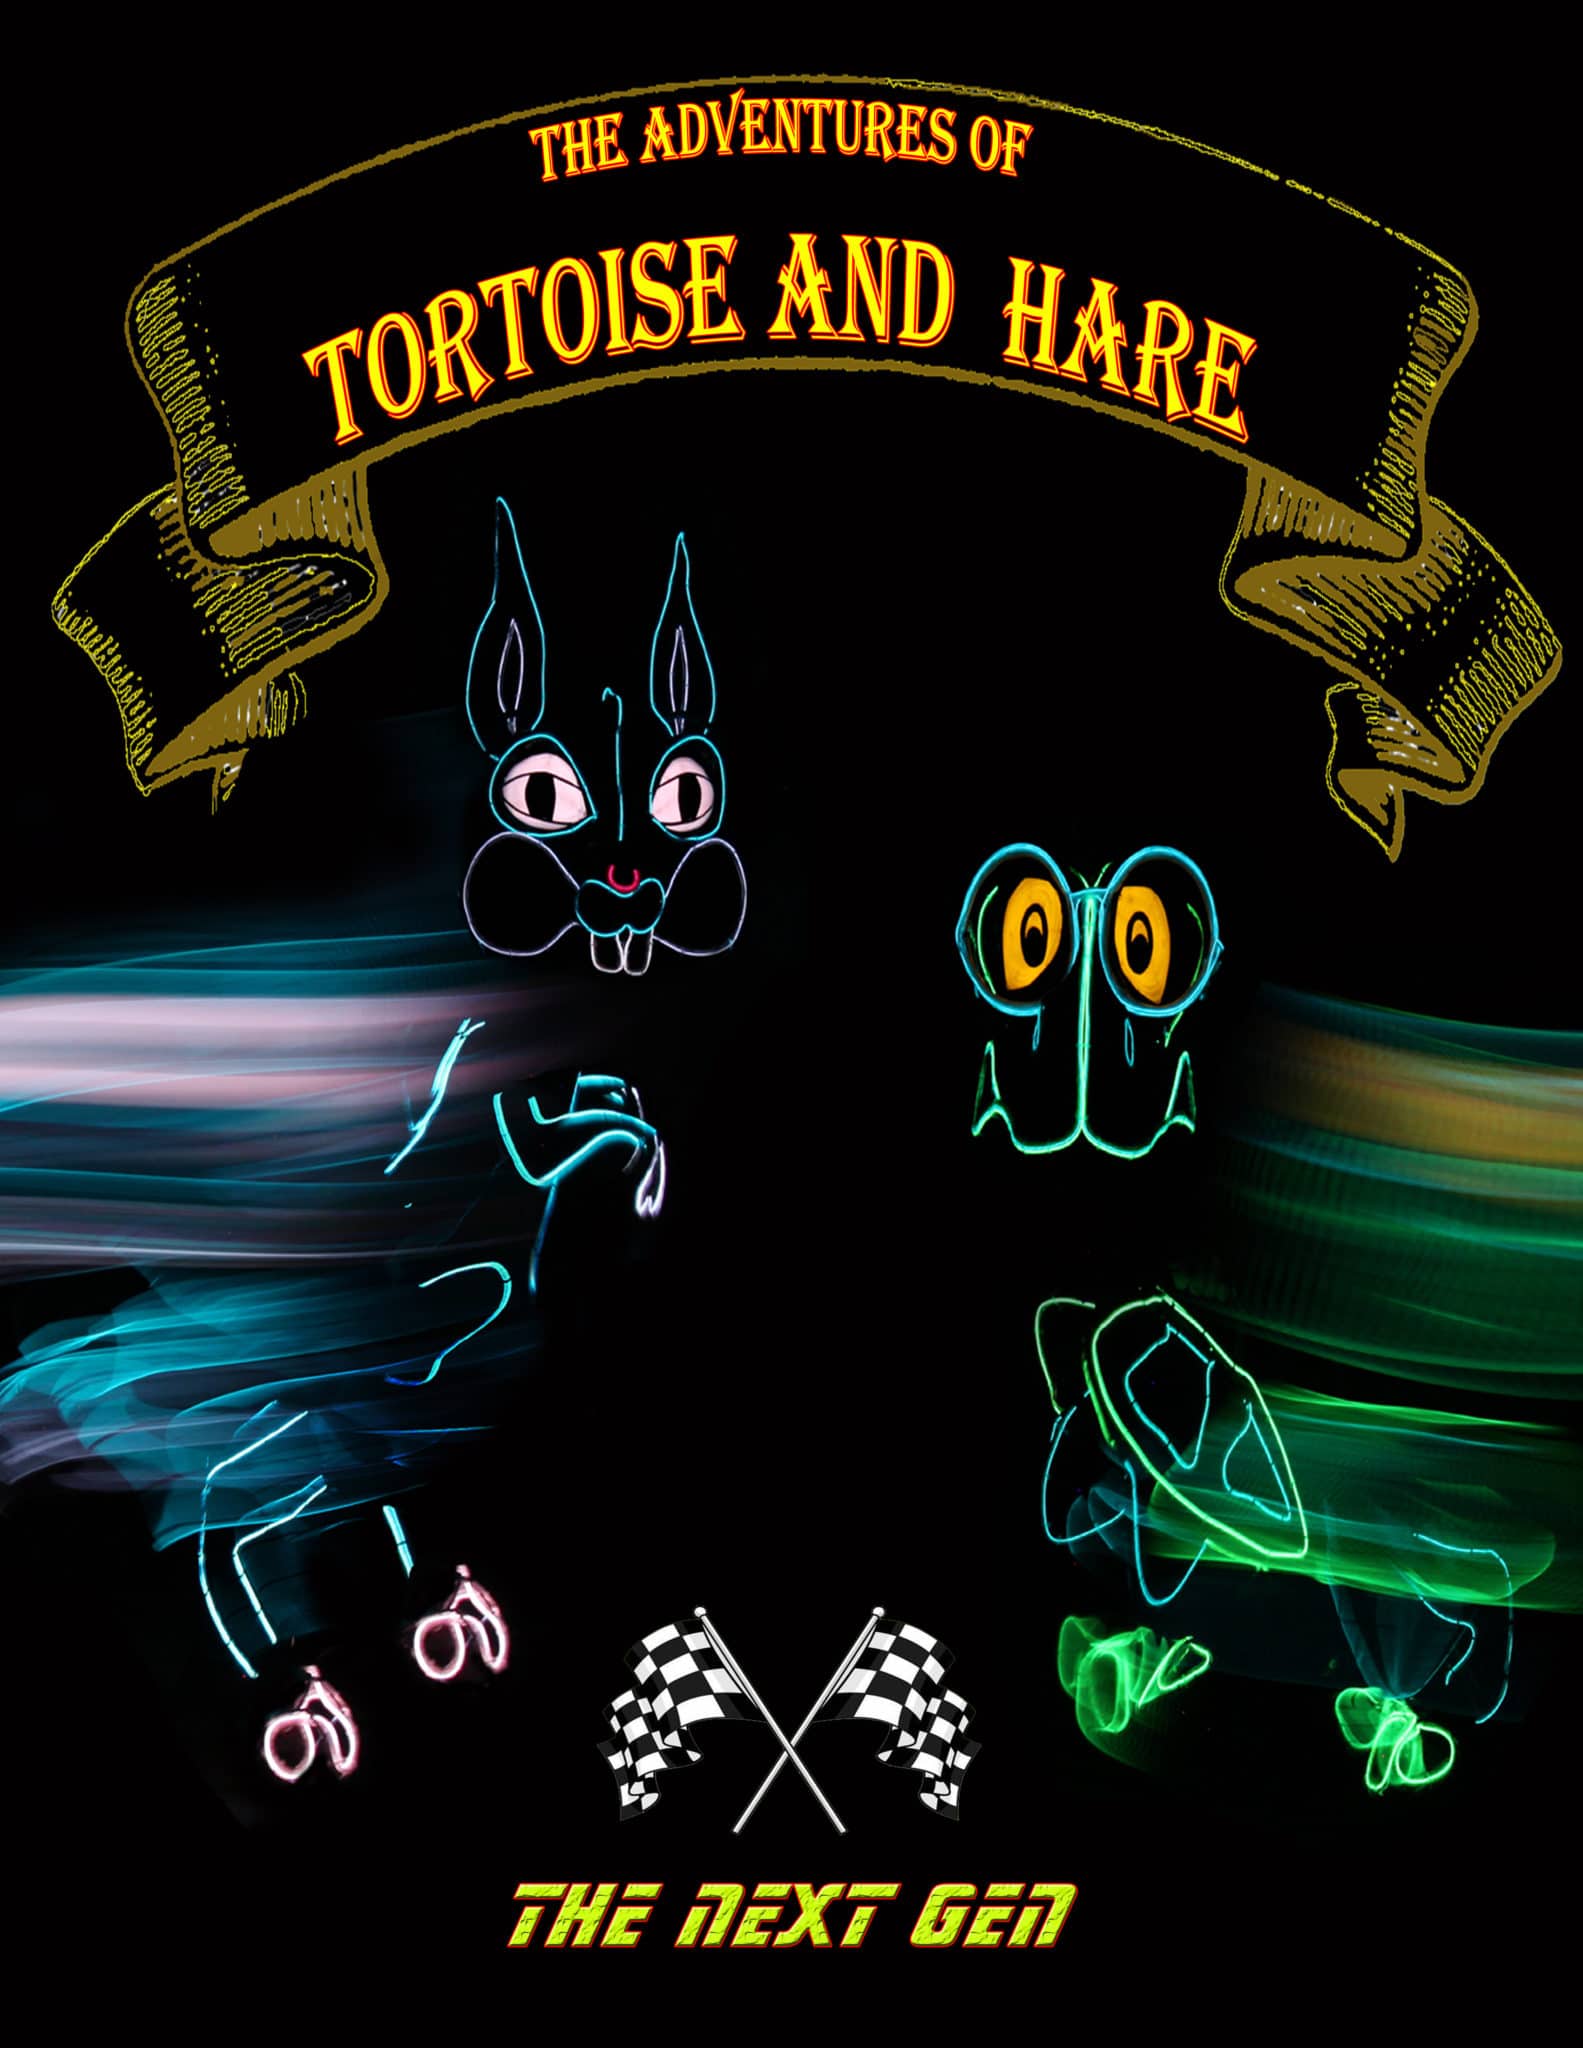 Lightwire Theater presents The Adventures of Tortoise and Hare: The Next Gen